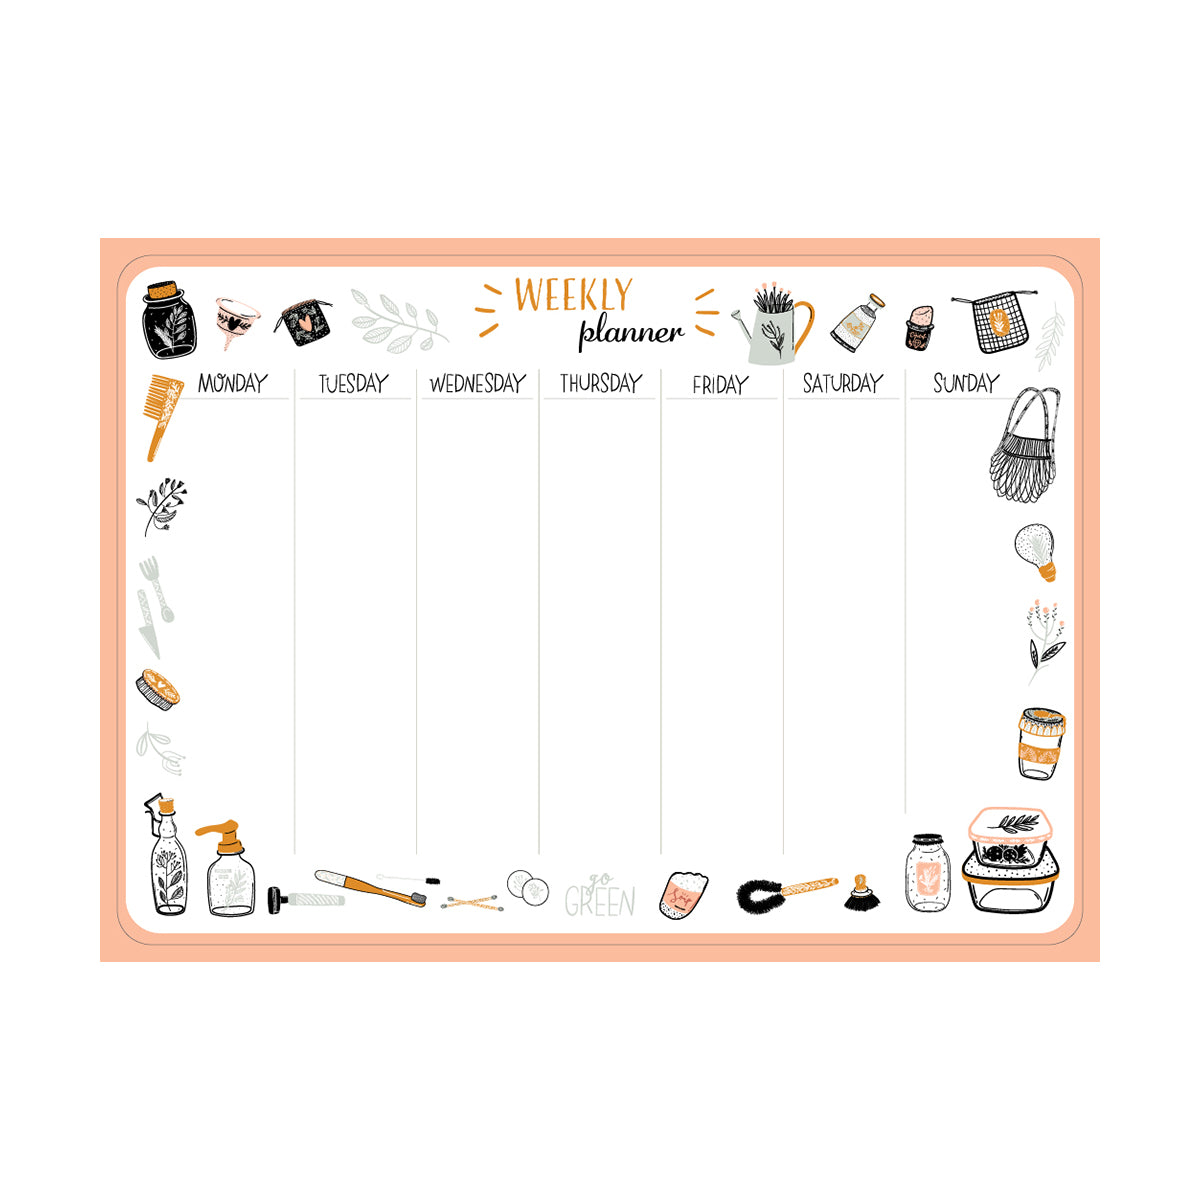 Dry Erase Weekly Planner Sign - High Quality Aluminum, Easy to Clean & Easy to Store